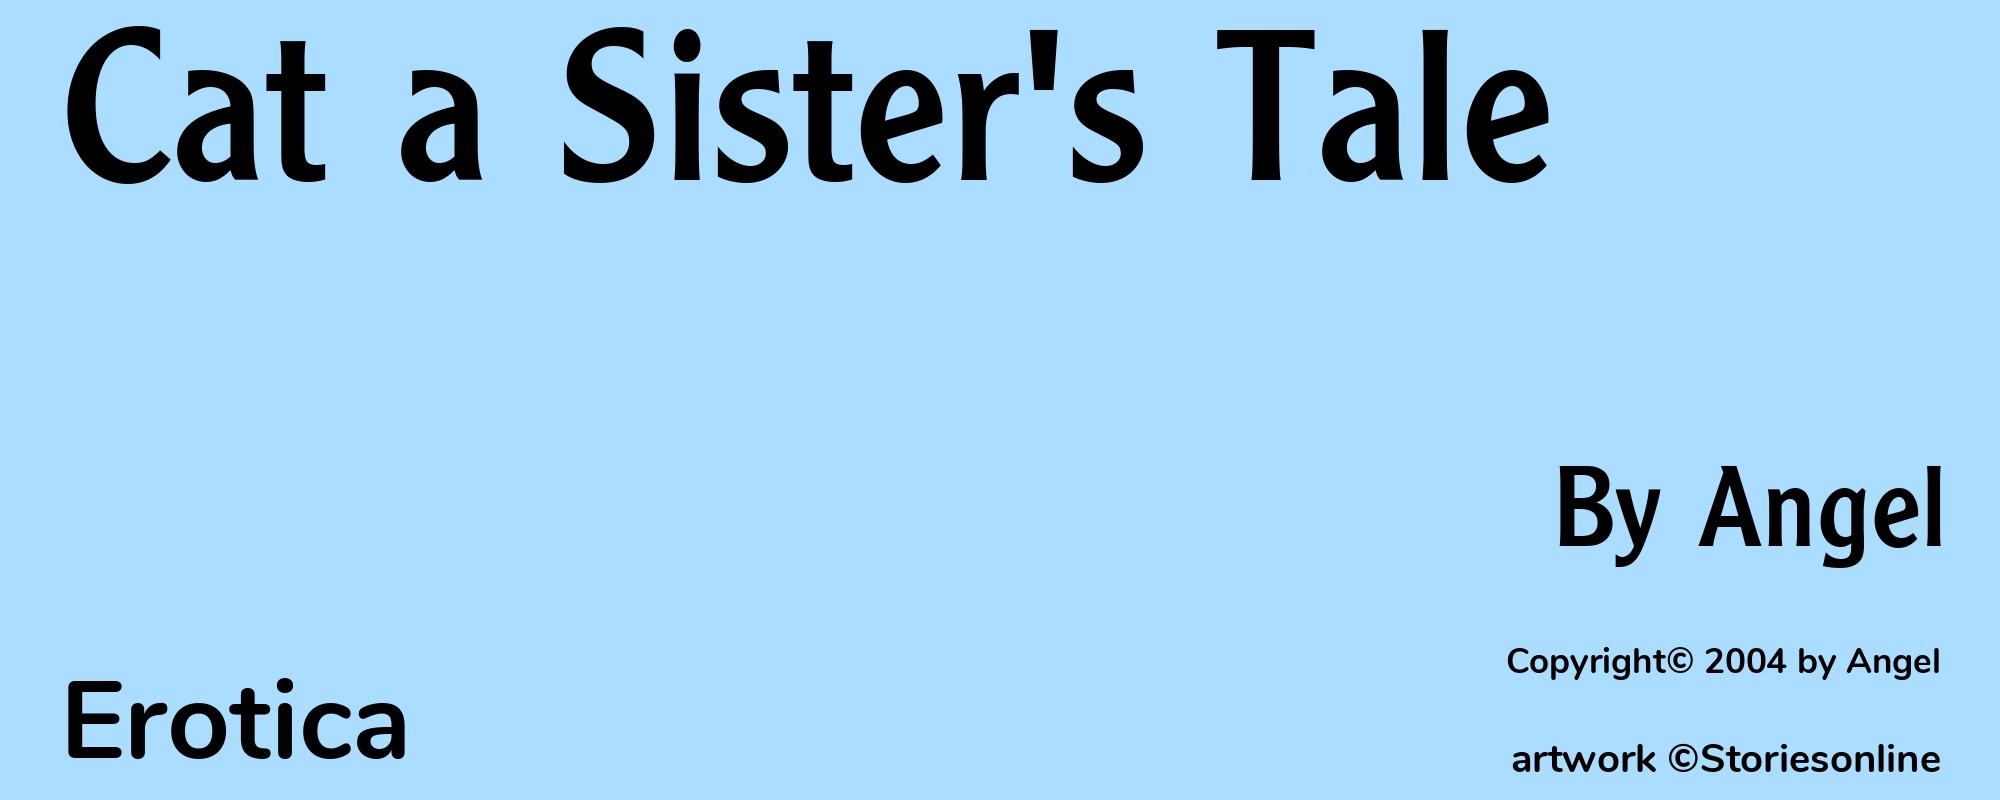 Cat a Sister's Tale - Cover